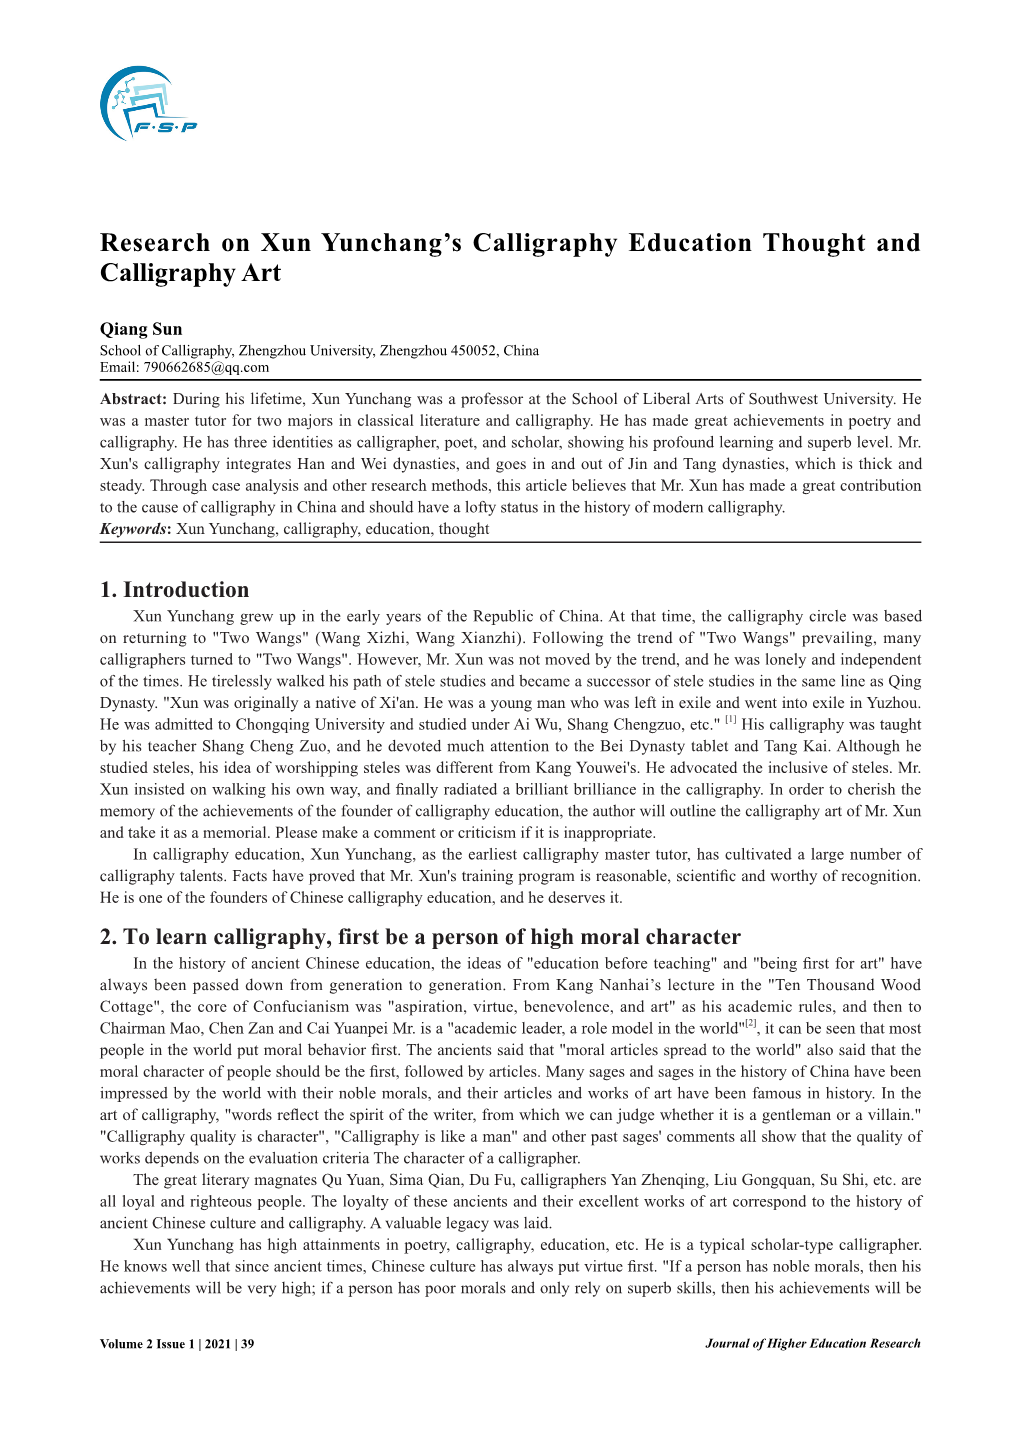 Research on Xun Yunchang's Calligraphy Education Thought And